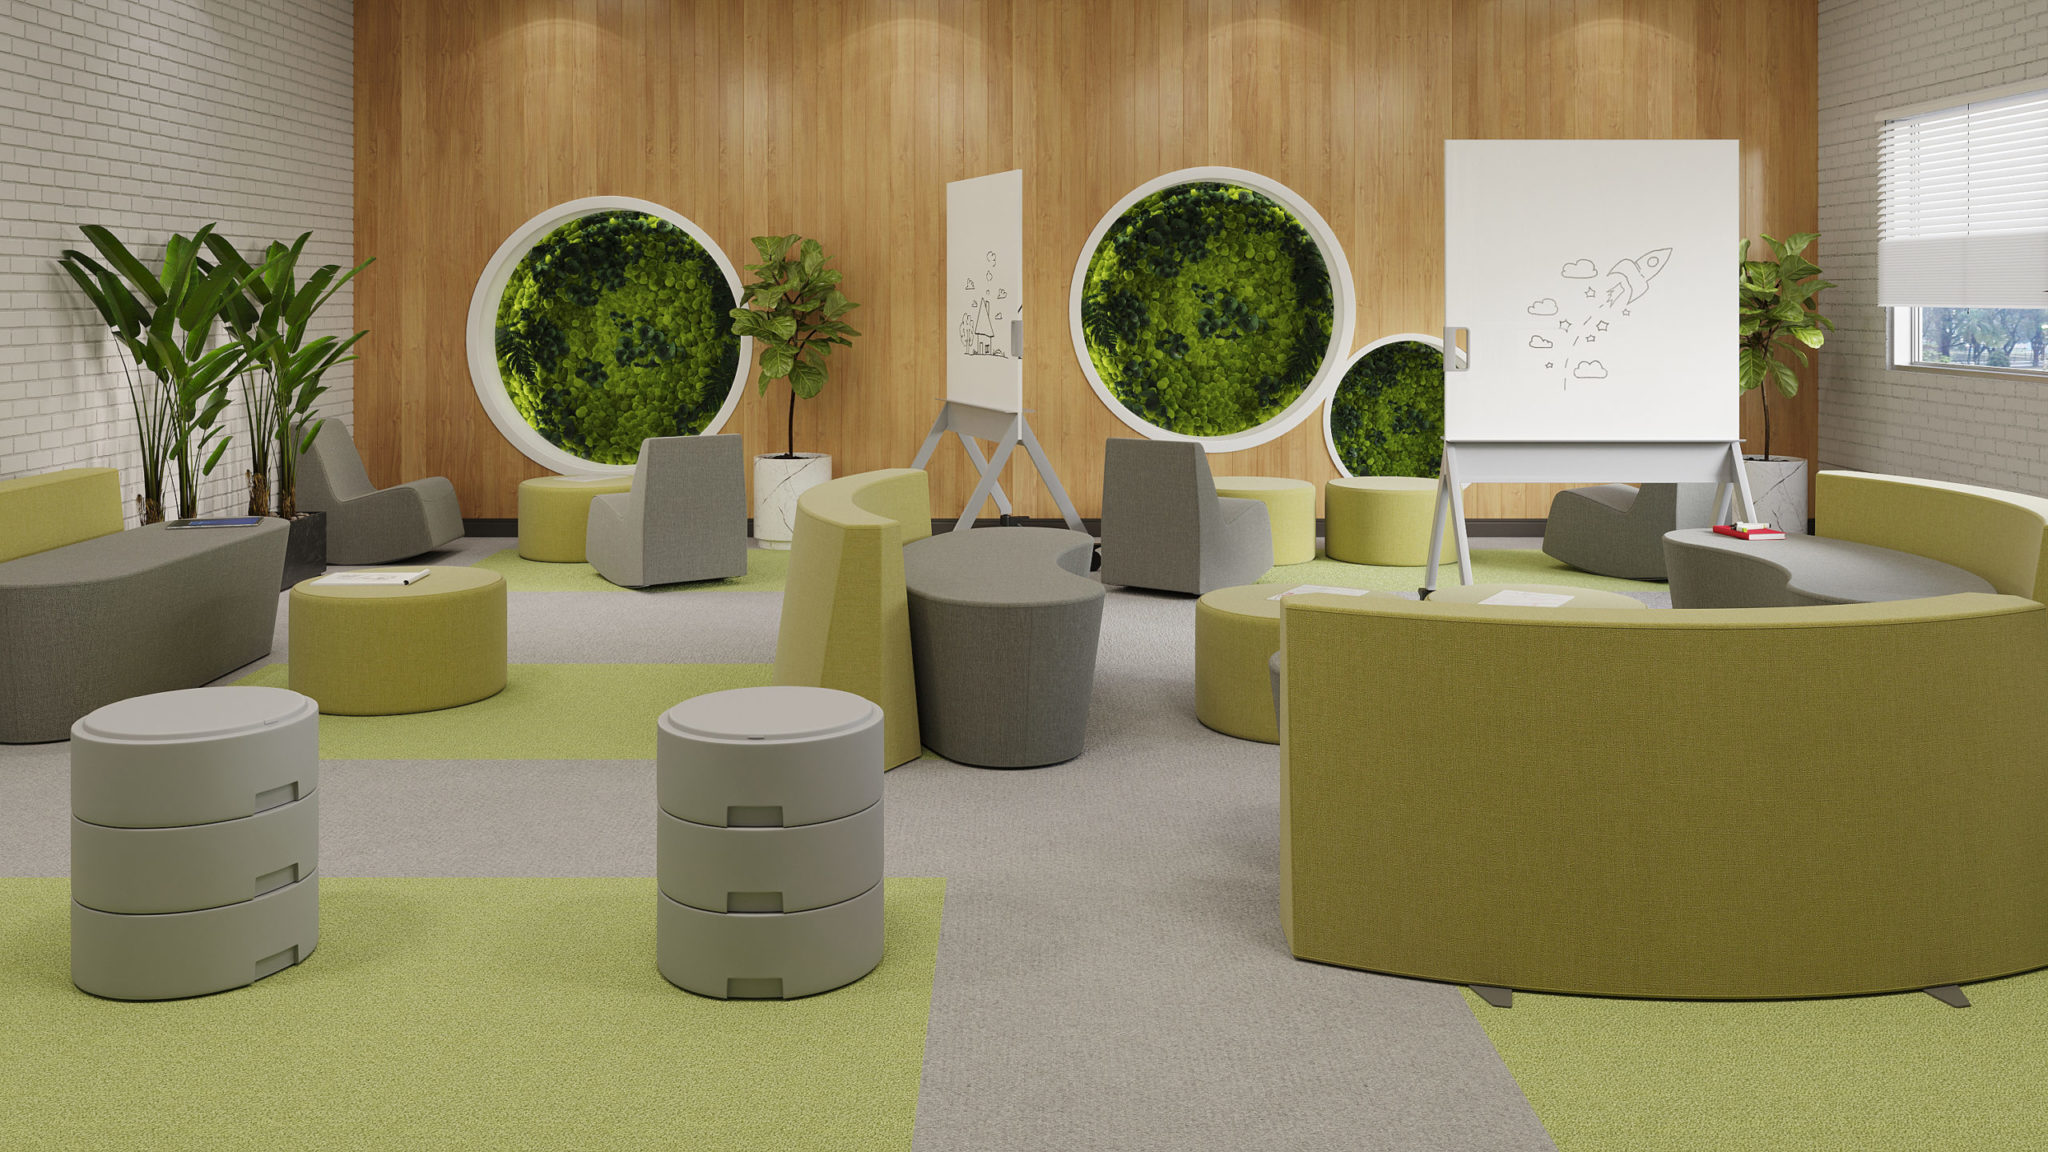 A rendering of a Calm Room for a school